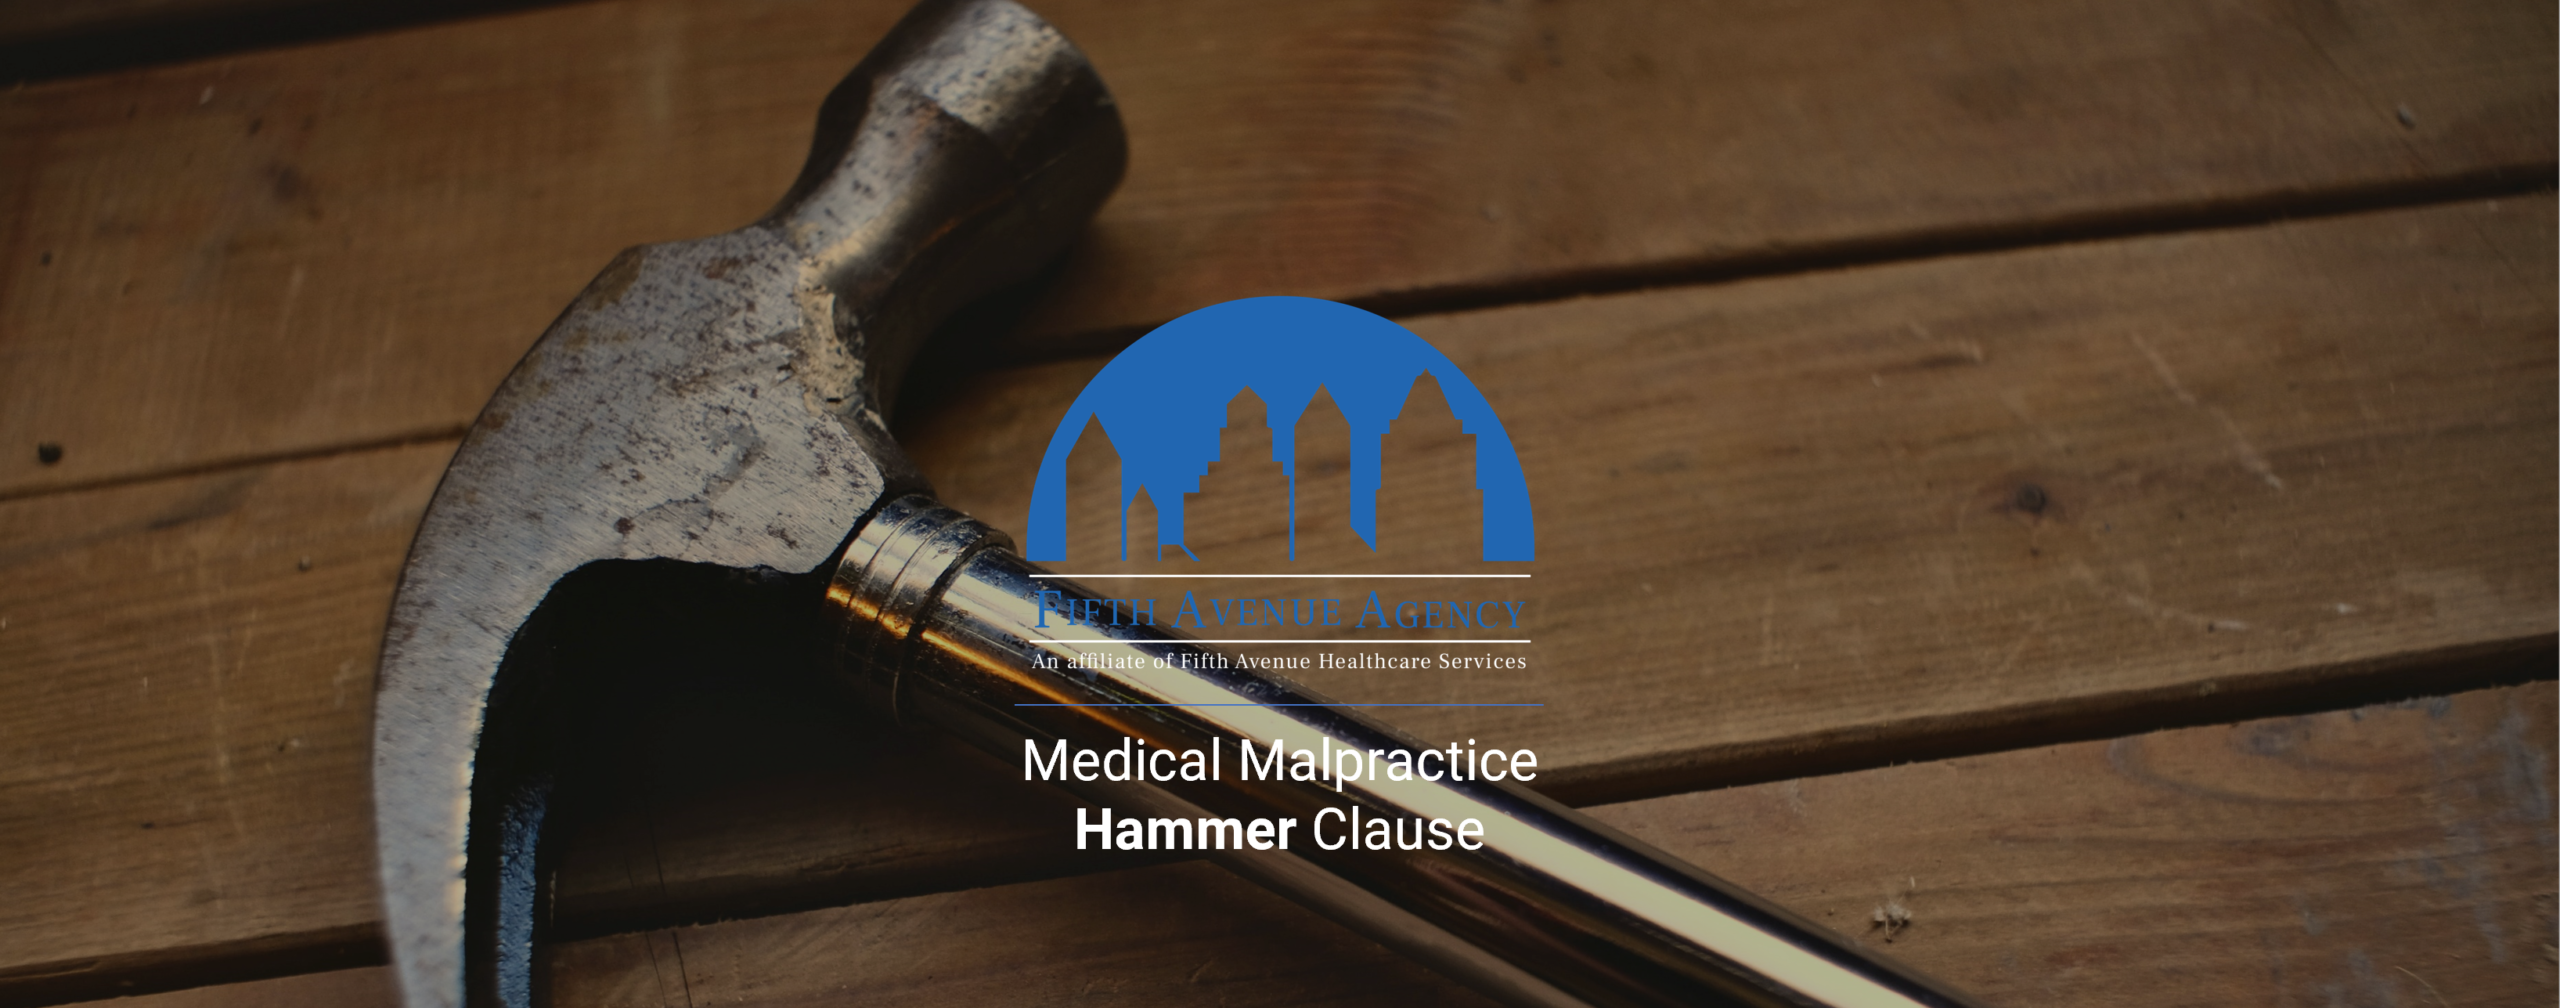 FifthAvenueAgency.com Medical Malpractice Hammer Clause